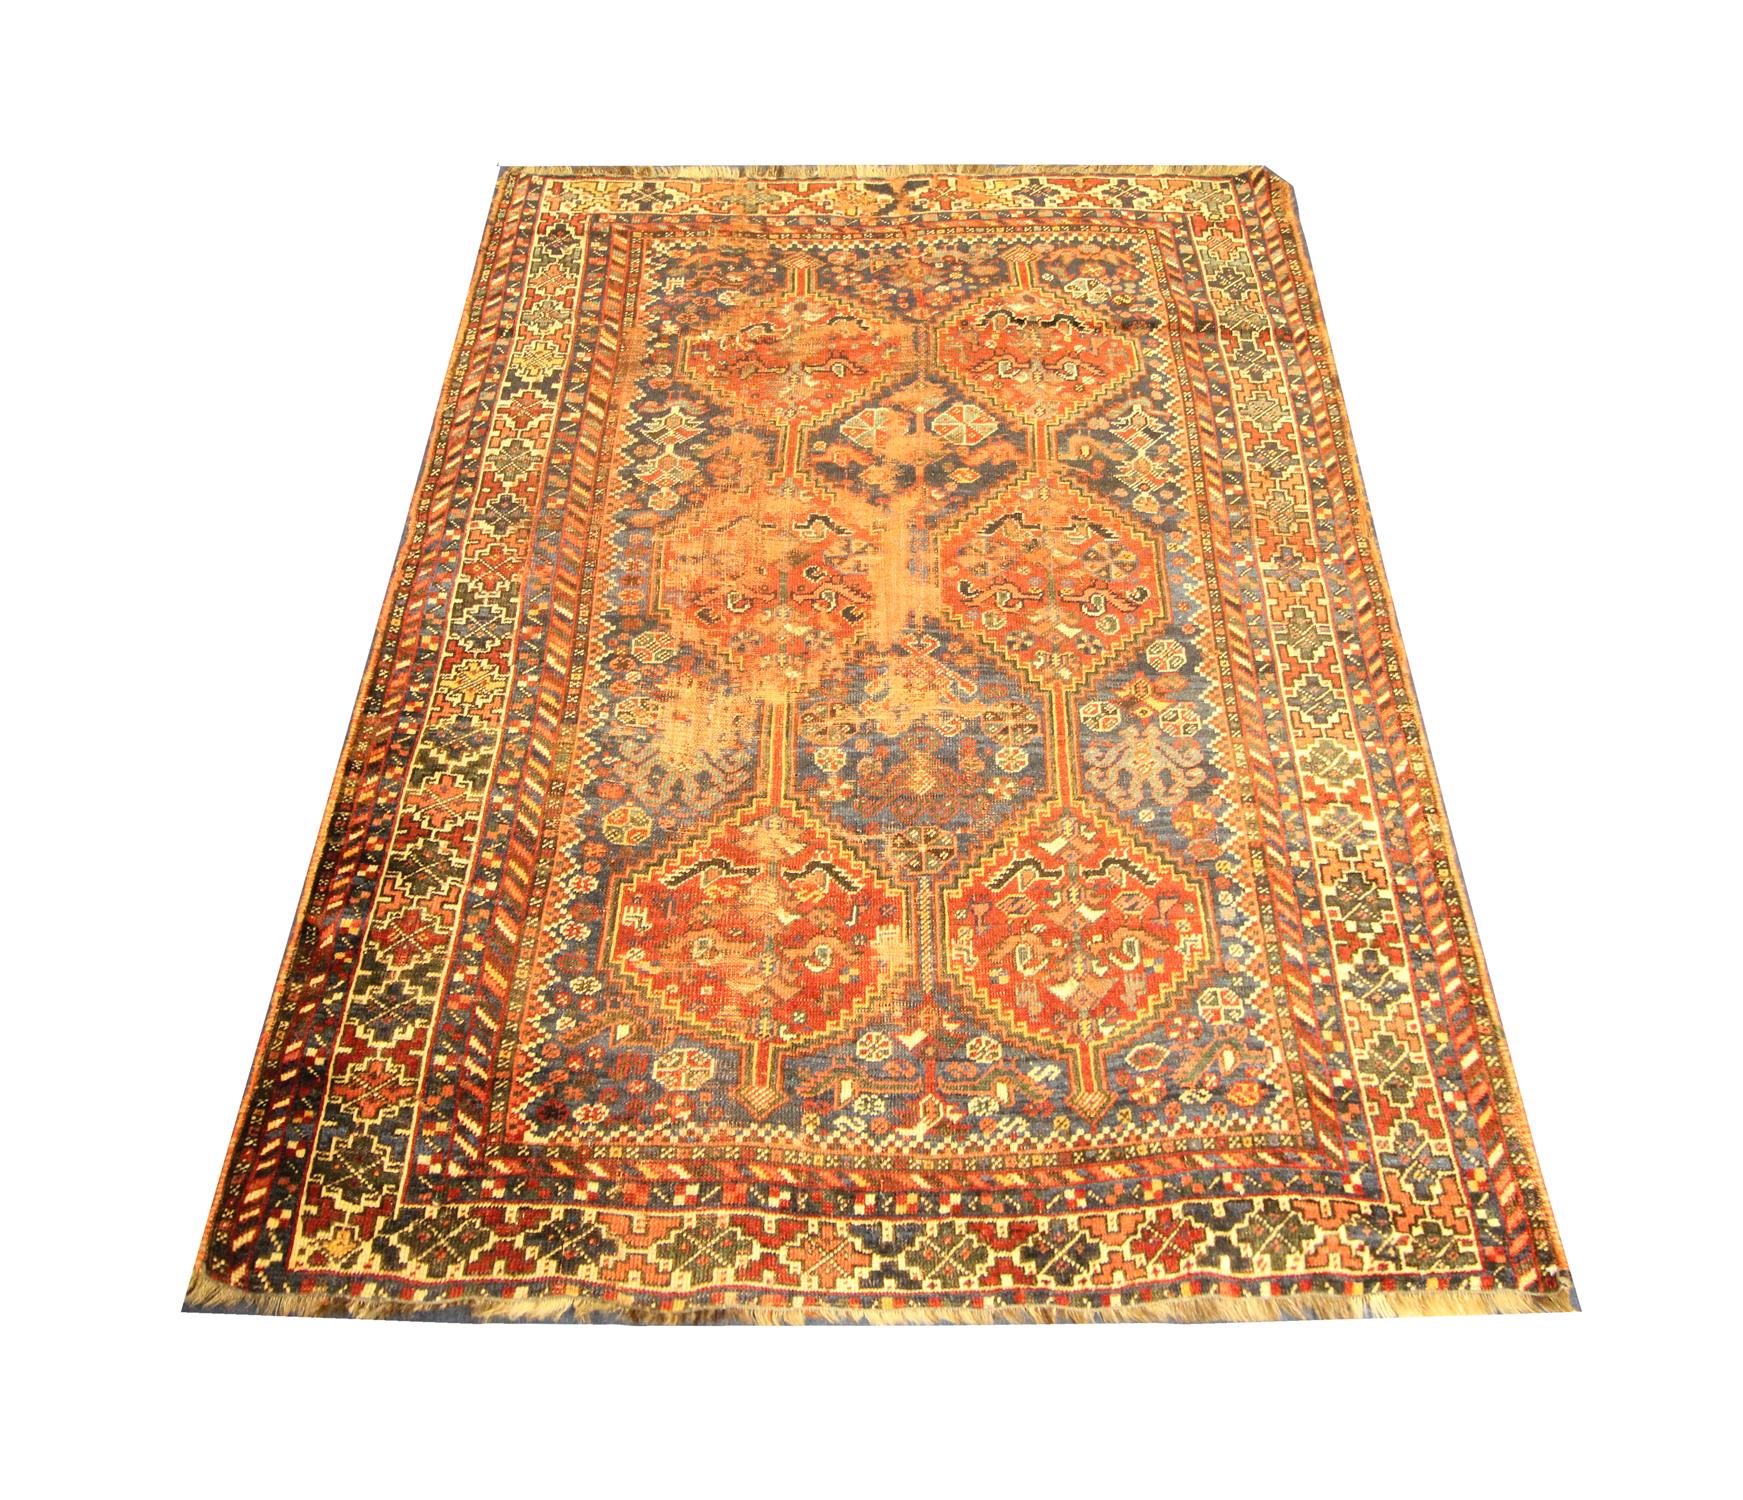 Tribal Handmade Antique Oriental Caucasian Rug, Small Traditional Wool Carpet For Sale